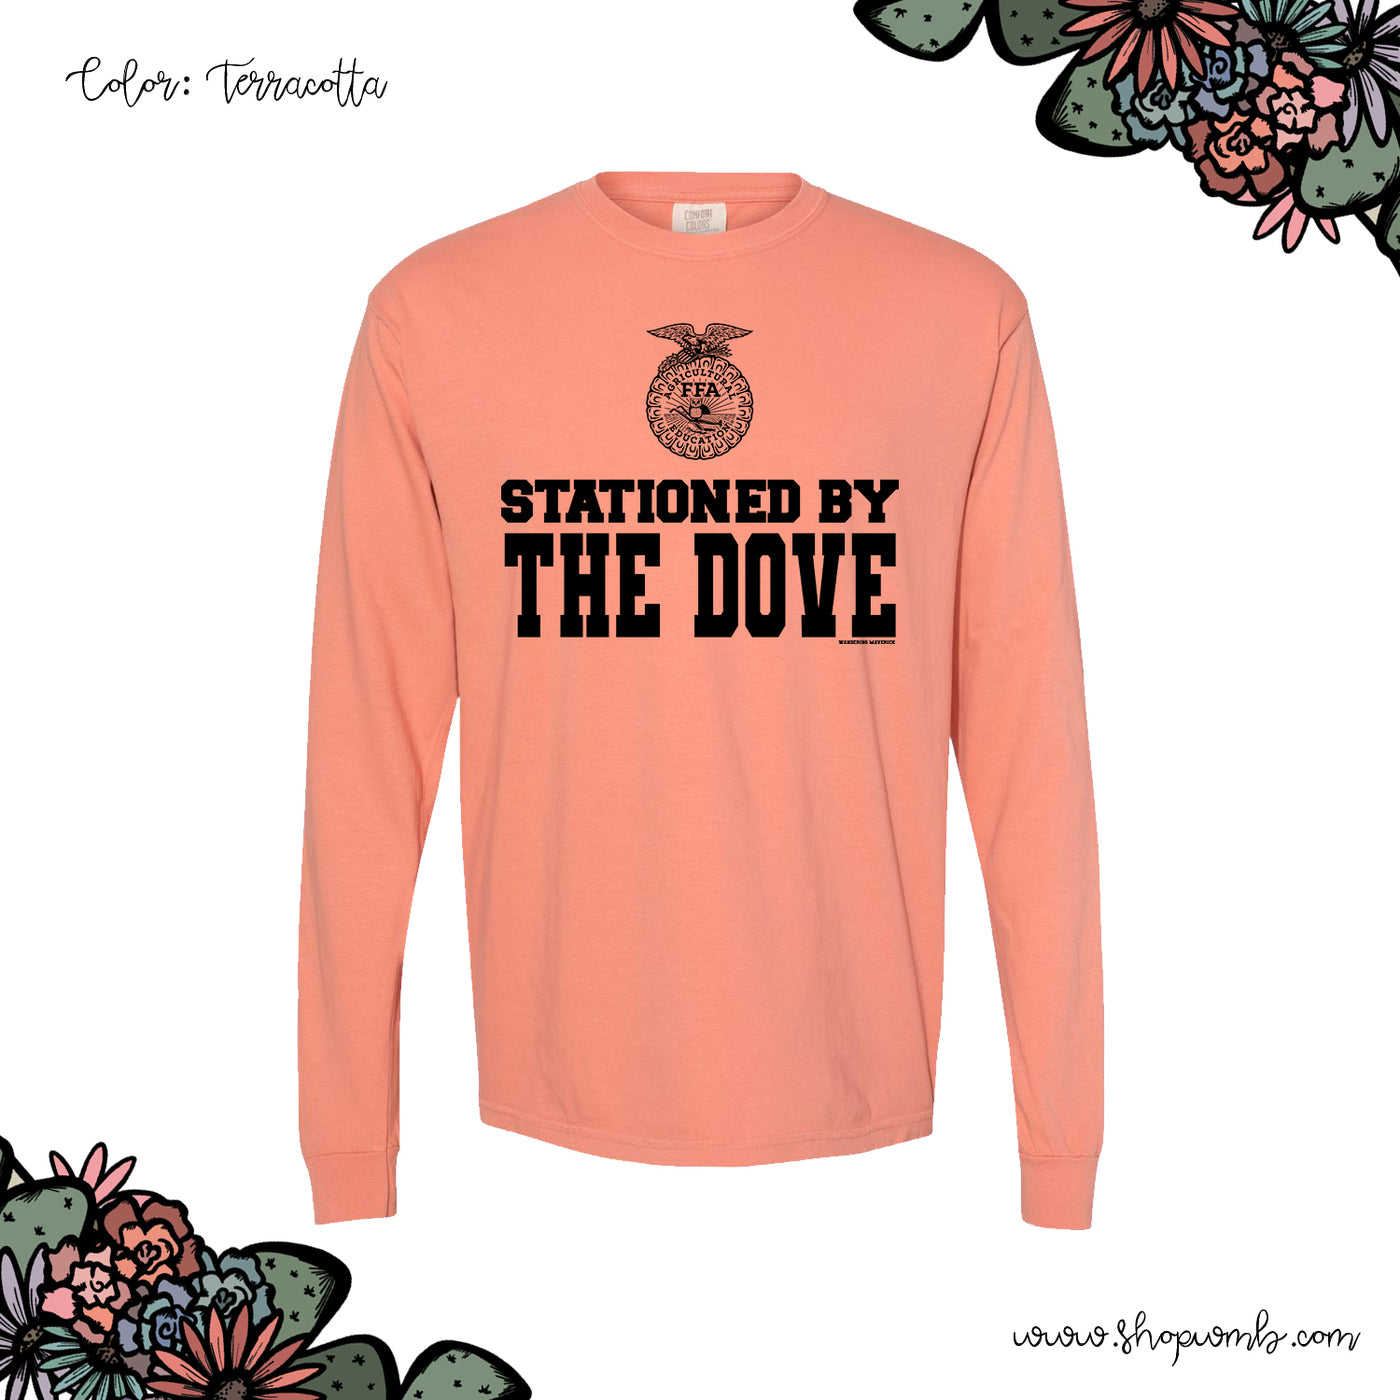 STATIONED BY THE DOVE FFA LONG SLEEVE T-Shirt (S-3XL) - Multiple Colors!